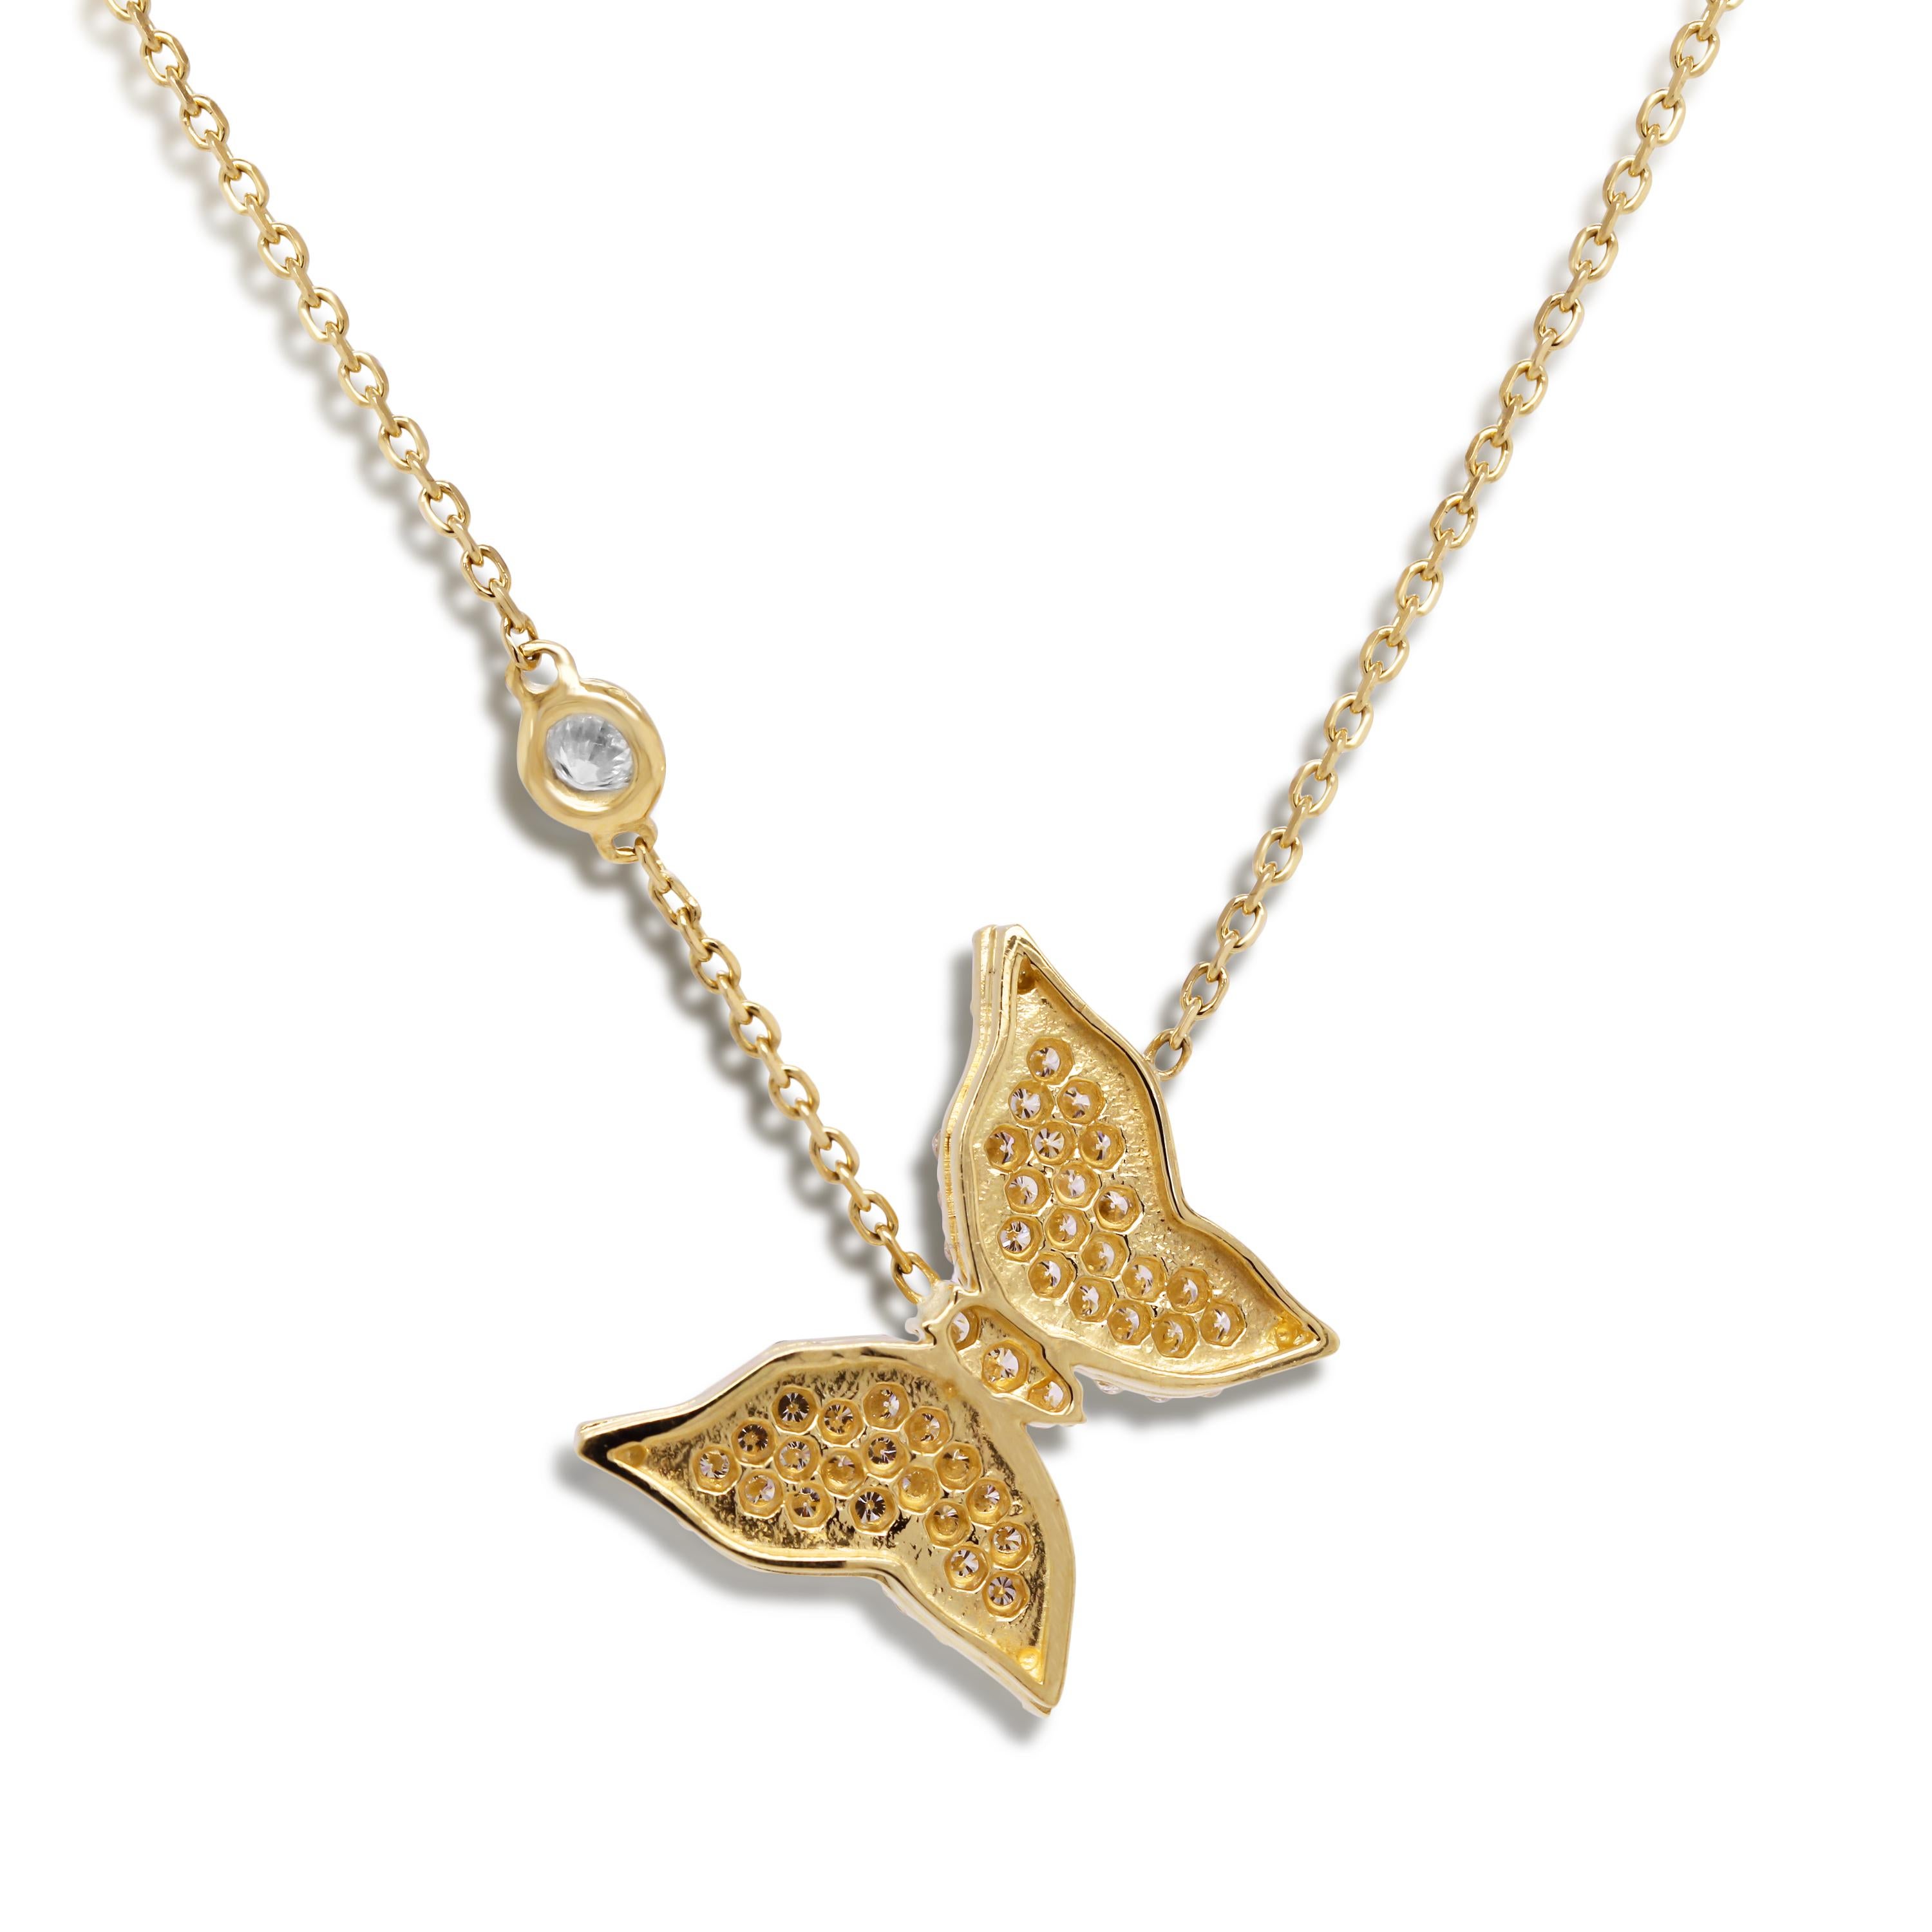 Stambolian 18 Karat Yellow Gold Diamond Butterfly Pendant Necklace

The 2021 Spring Butterfly by Stambolian, this is the smaller version hand made in solid 18k yellow gold. Diamonds are pavé set on the butterfly and the chain also has one bezel-set